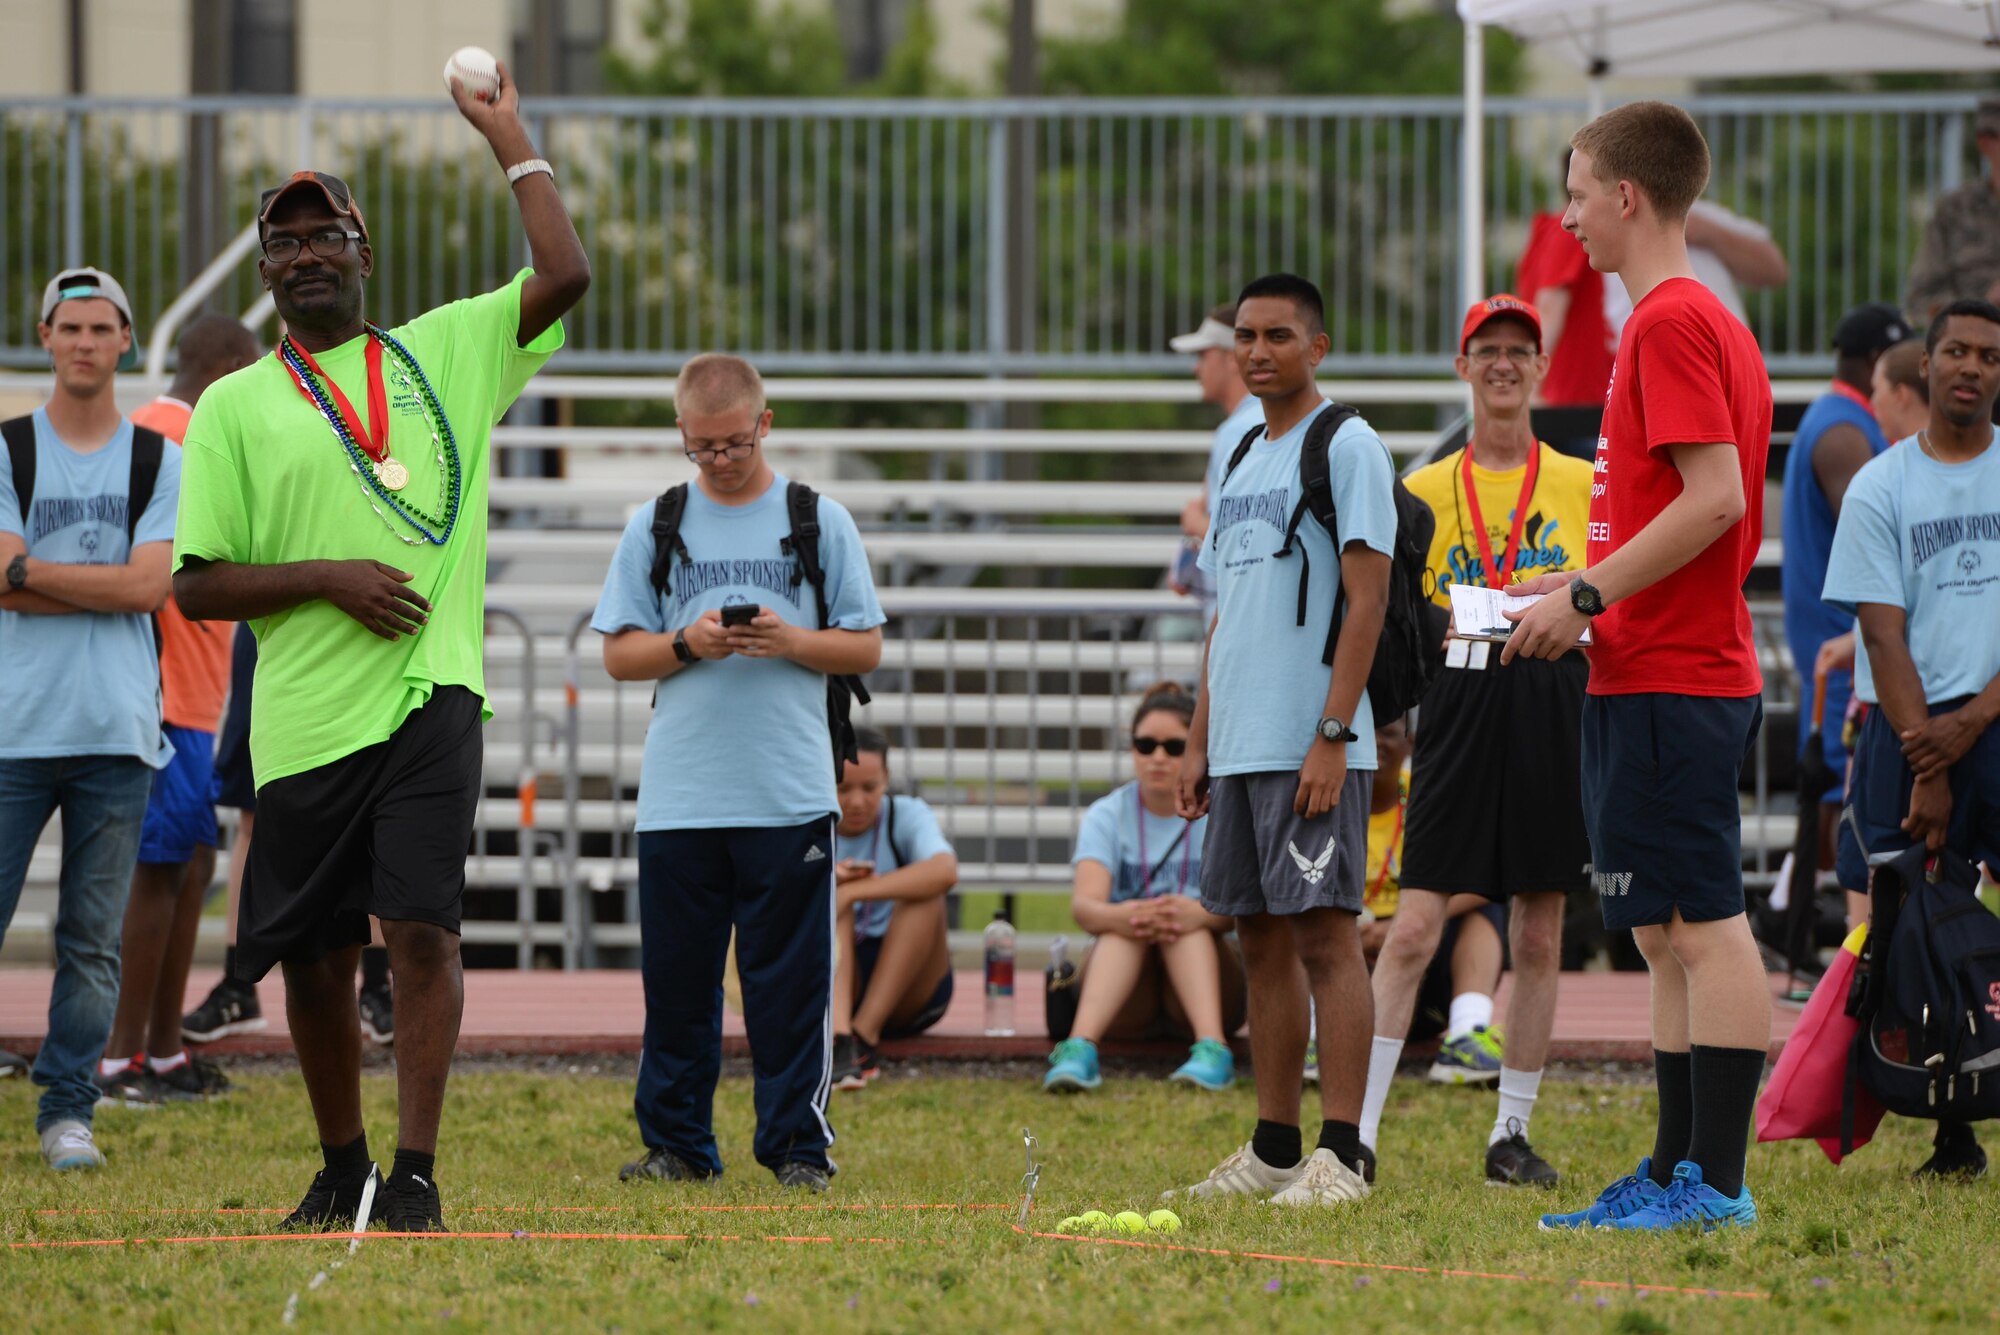 A Special Olympics athlete winds up a throw at a softball throw competition during the SOMS 2017 Summer Games at the Triangle Track, May 20, 2017, on Keesler Air Force Base, Miss. Founded in 1968, Special Olympics hosts sporting events around the world for people of all ages with special needs, to include more than 700 athletes from Mississippi. (U.S. Air Force photo by Senior Airman Duncan McElroy)